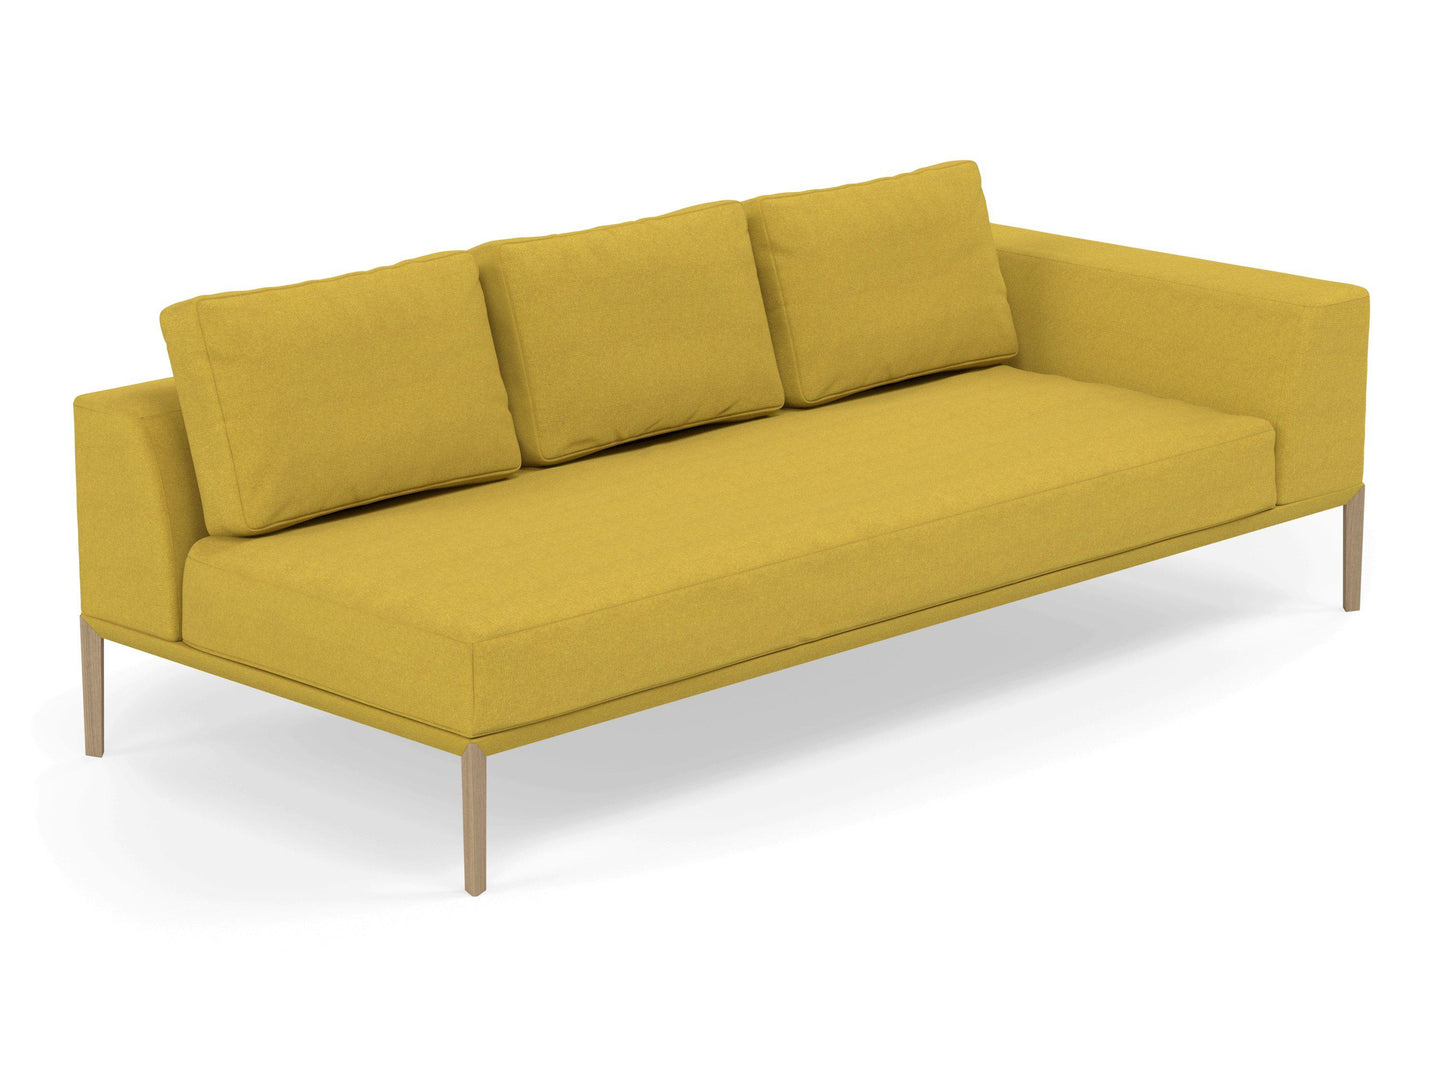 Modern 3 Seater Chaise Lounge Style Sofa with Left Armrest in Vibrant Mustard Fabric-Distinct Designs (London) Ltd